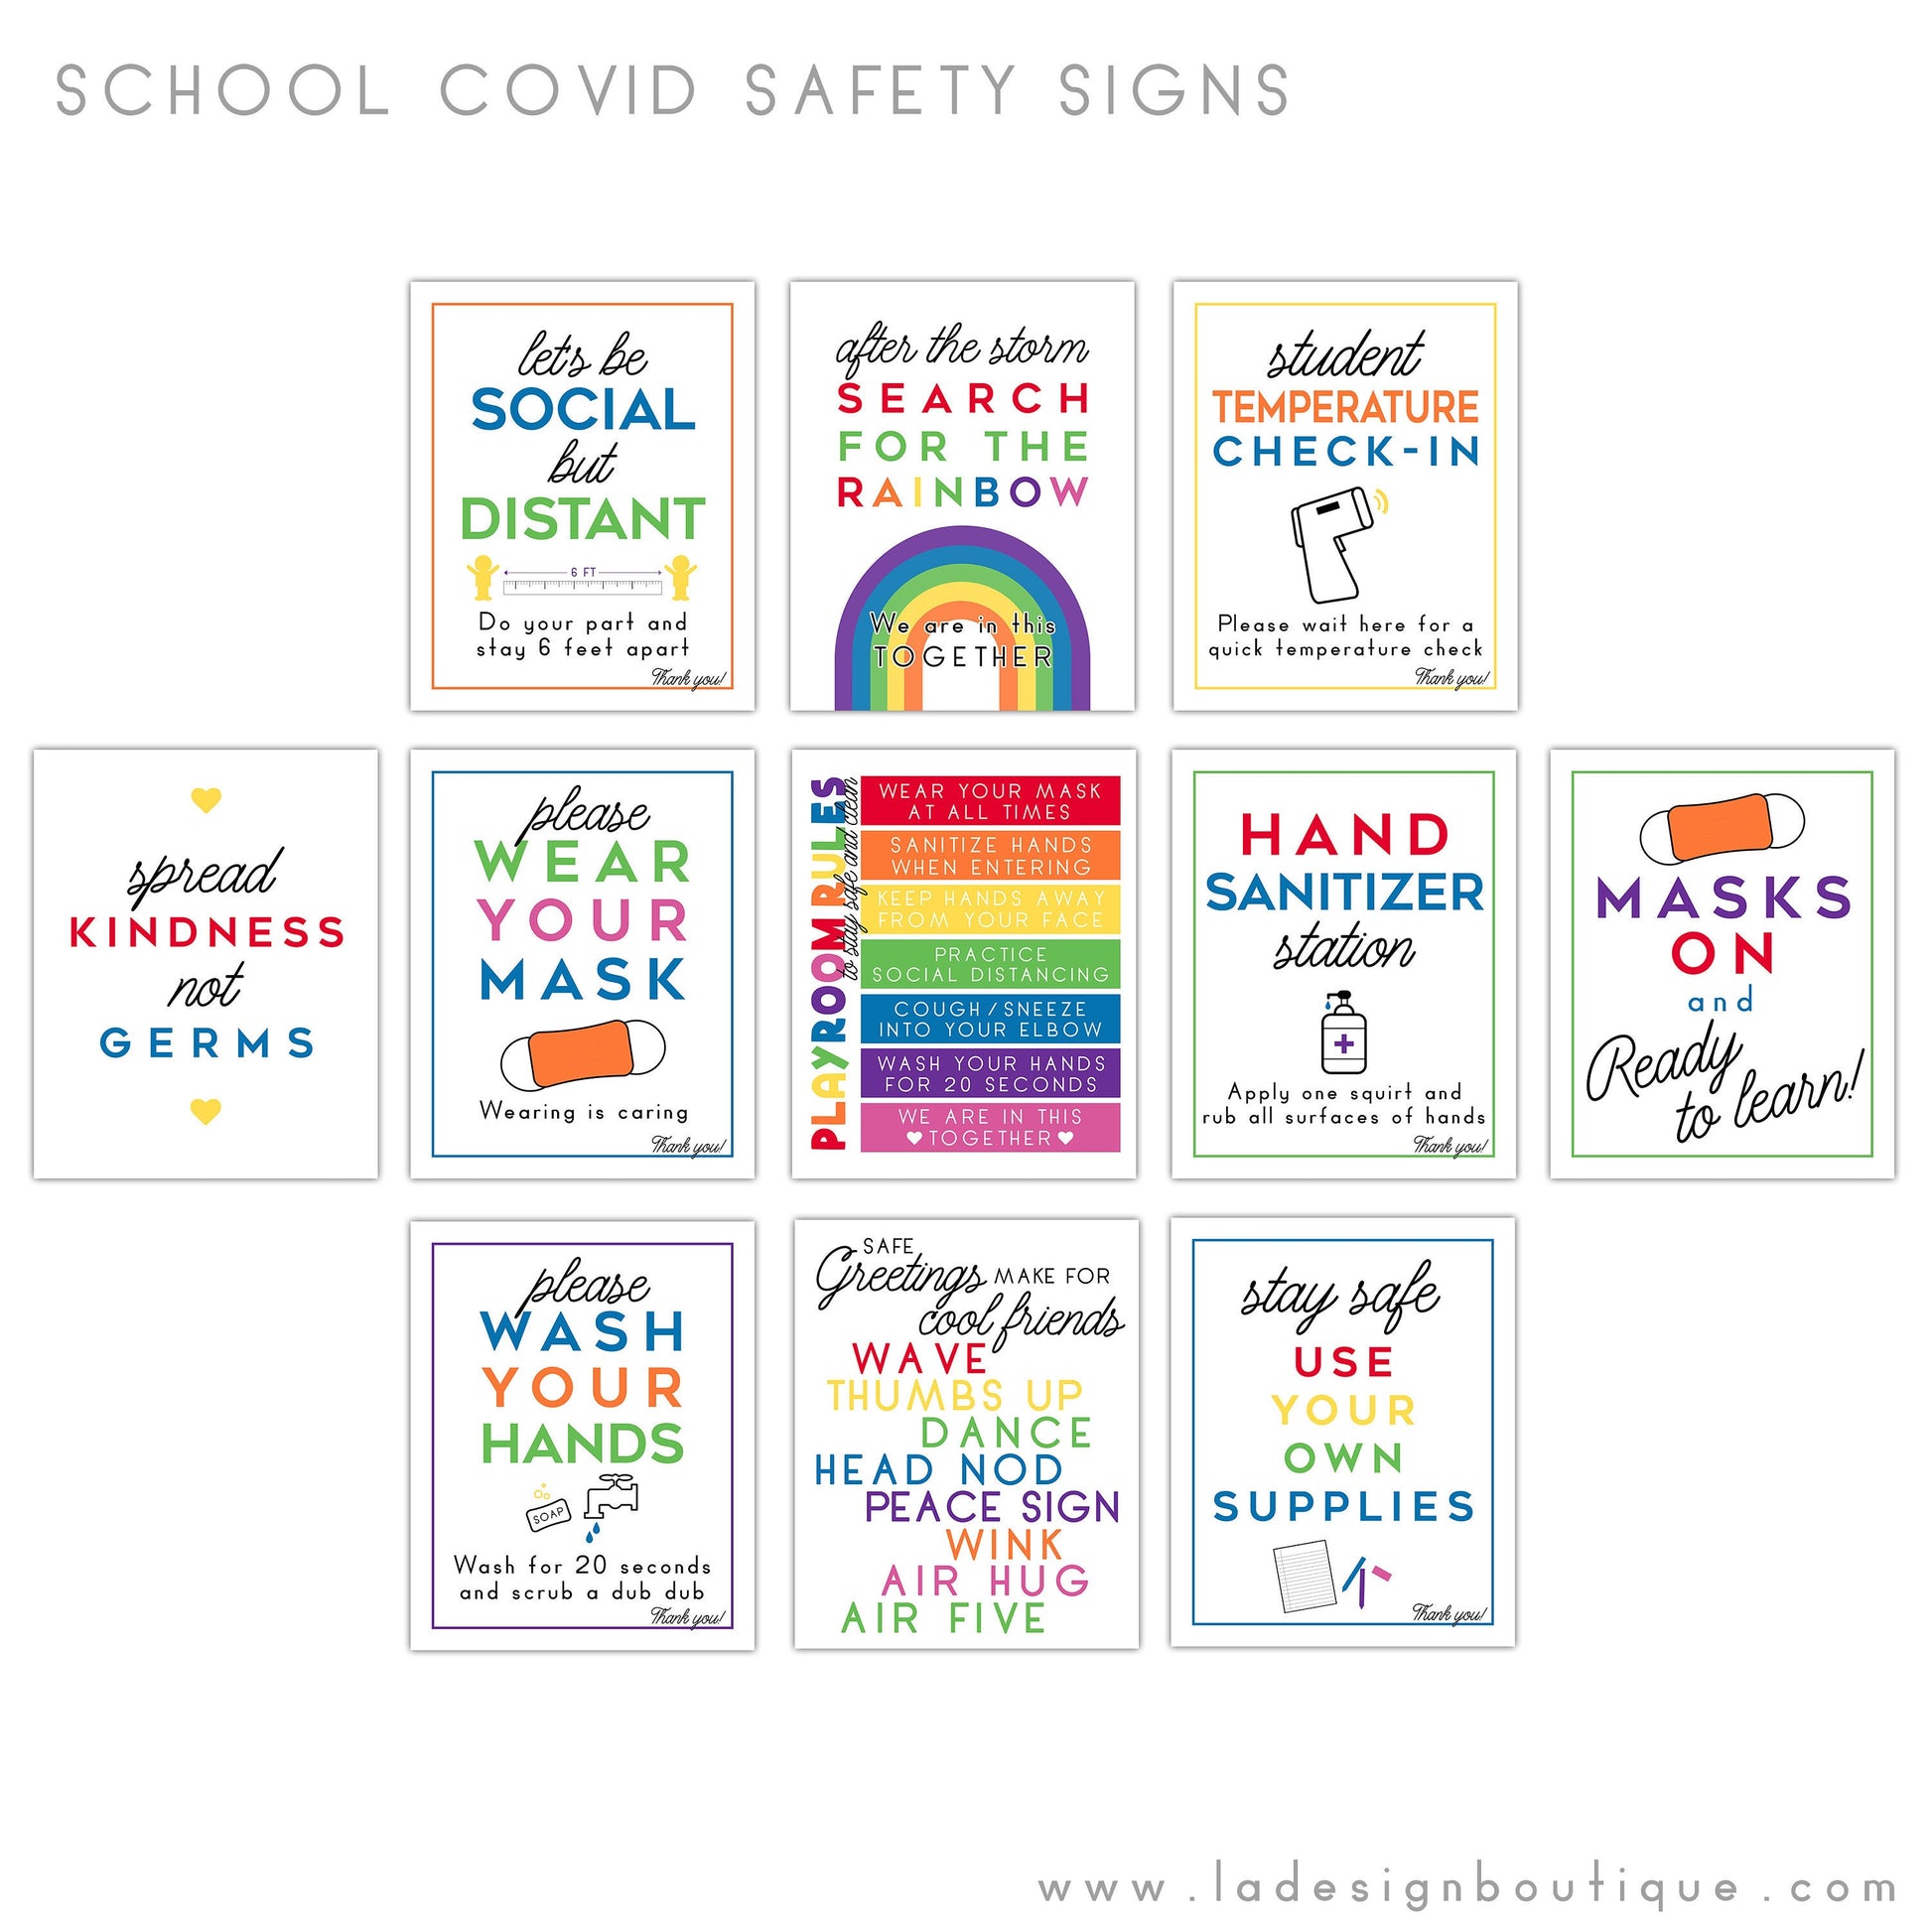 School Signs for Covid Health Safety, Health Safety Signs, Classroom Signs, Wear a Mask, Social Distancing, Wash Your Hands, Sanitize Signs